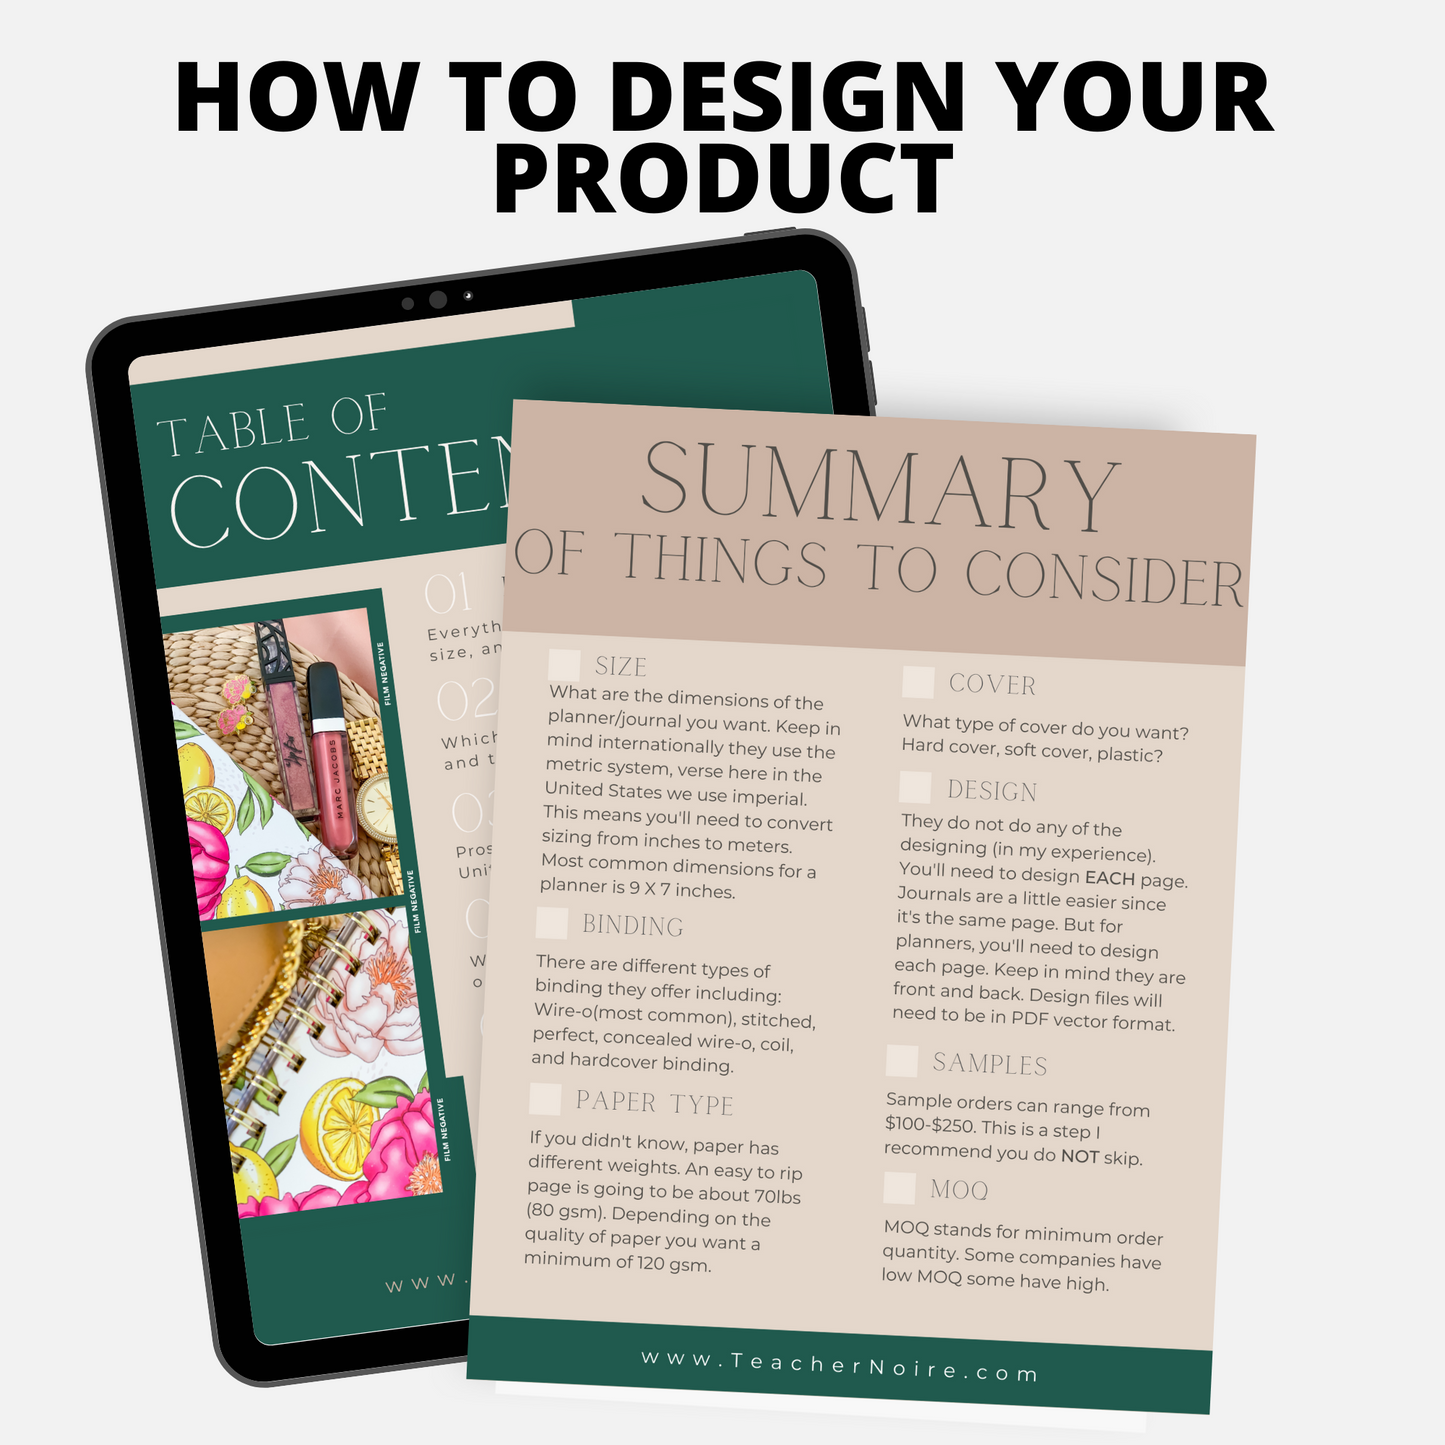 Complete Planner Guide eBook, How to Start a Paper Company